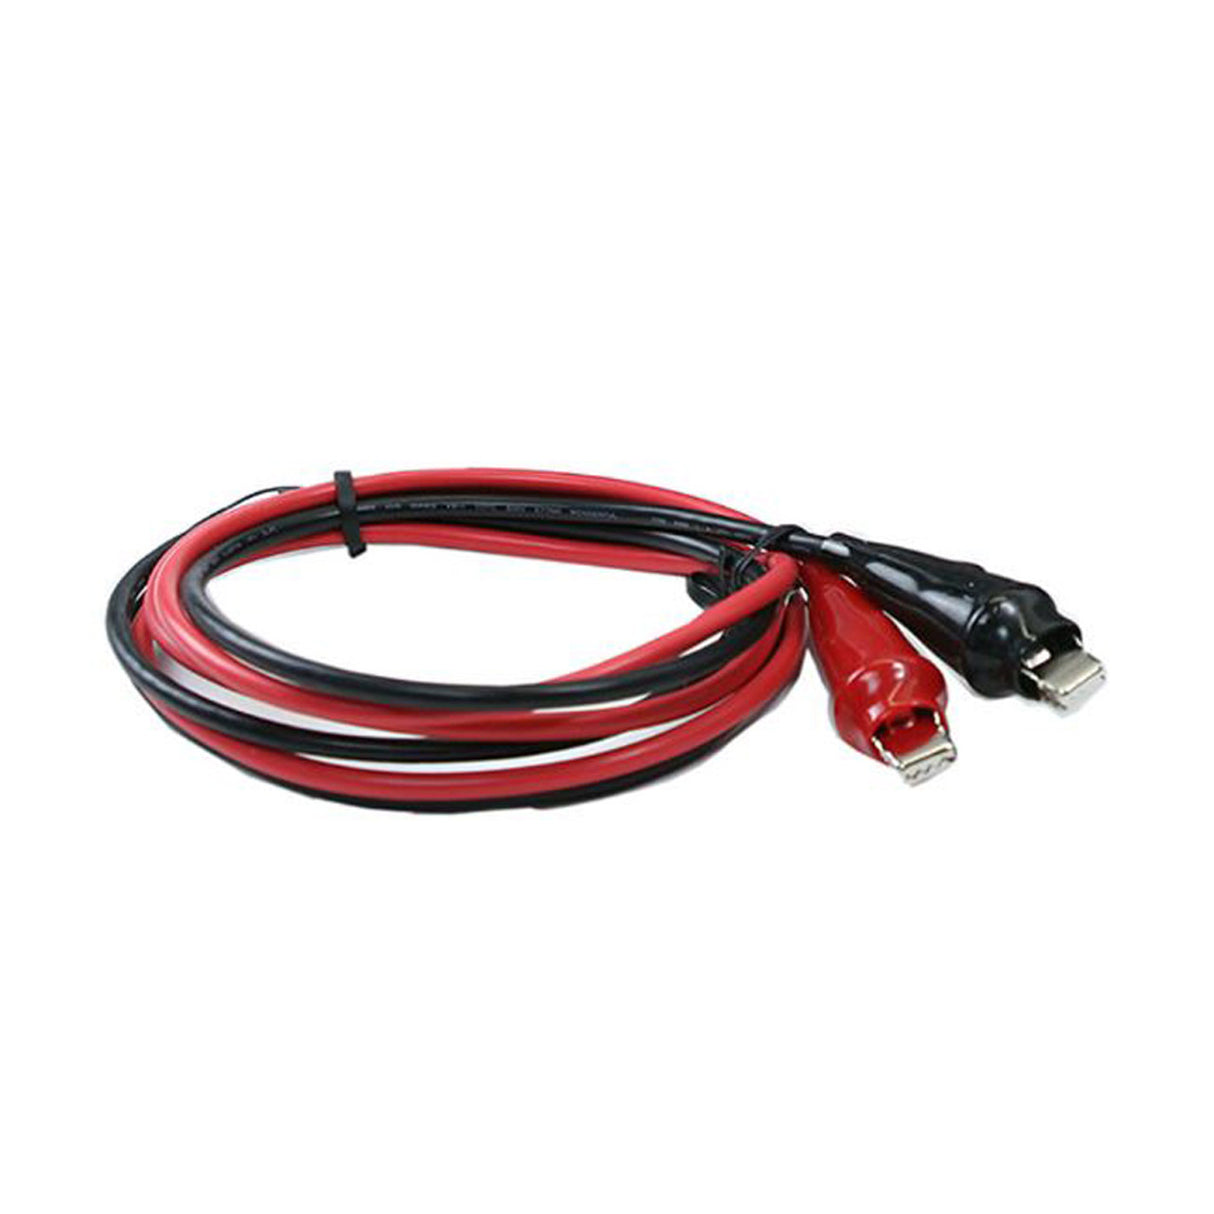 Replacement Lead Wires for Arbe 25A Rectifier